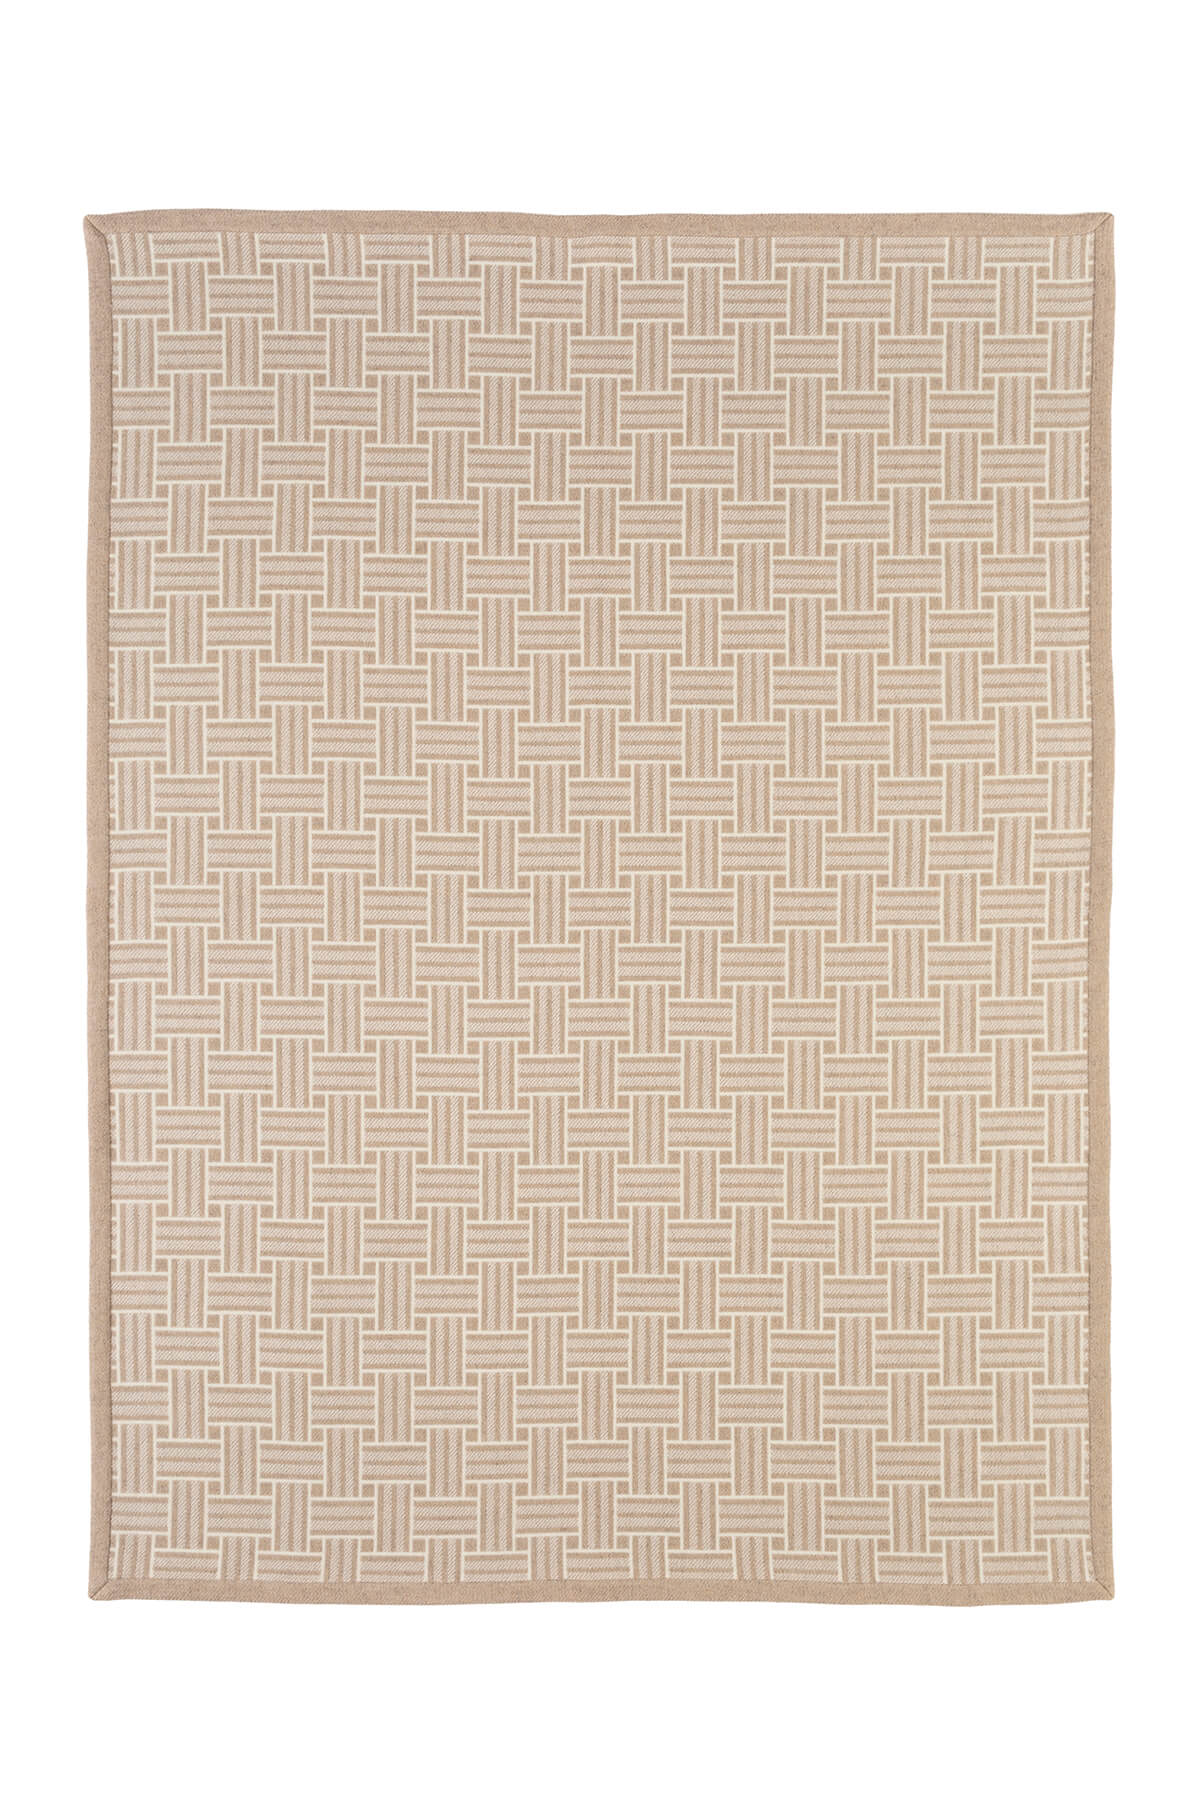 Johnstons of Elgin’s Natural & White Basket Weave Throw on white background TB000470RU6999ONE